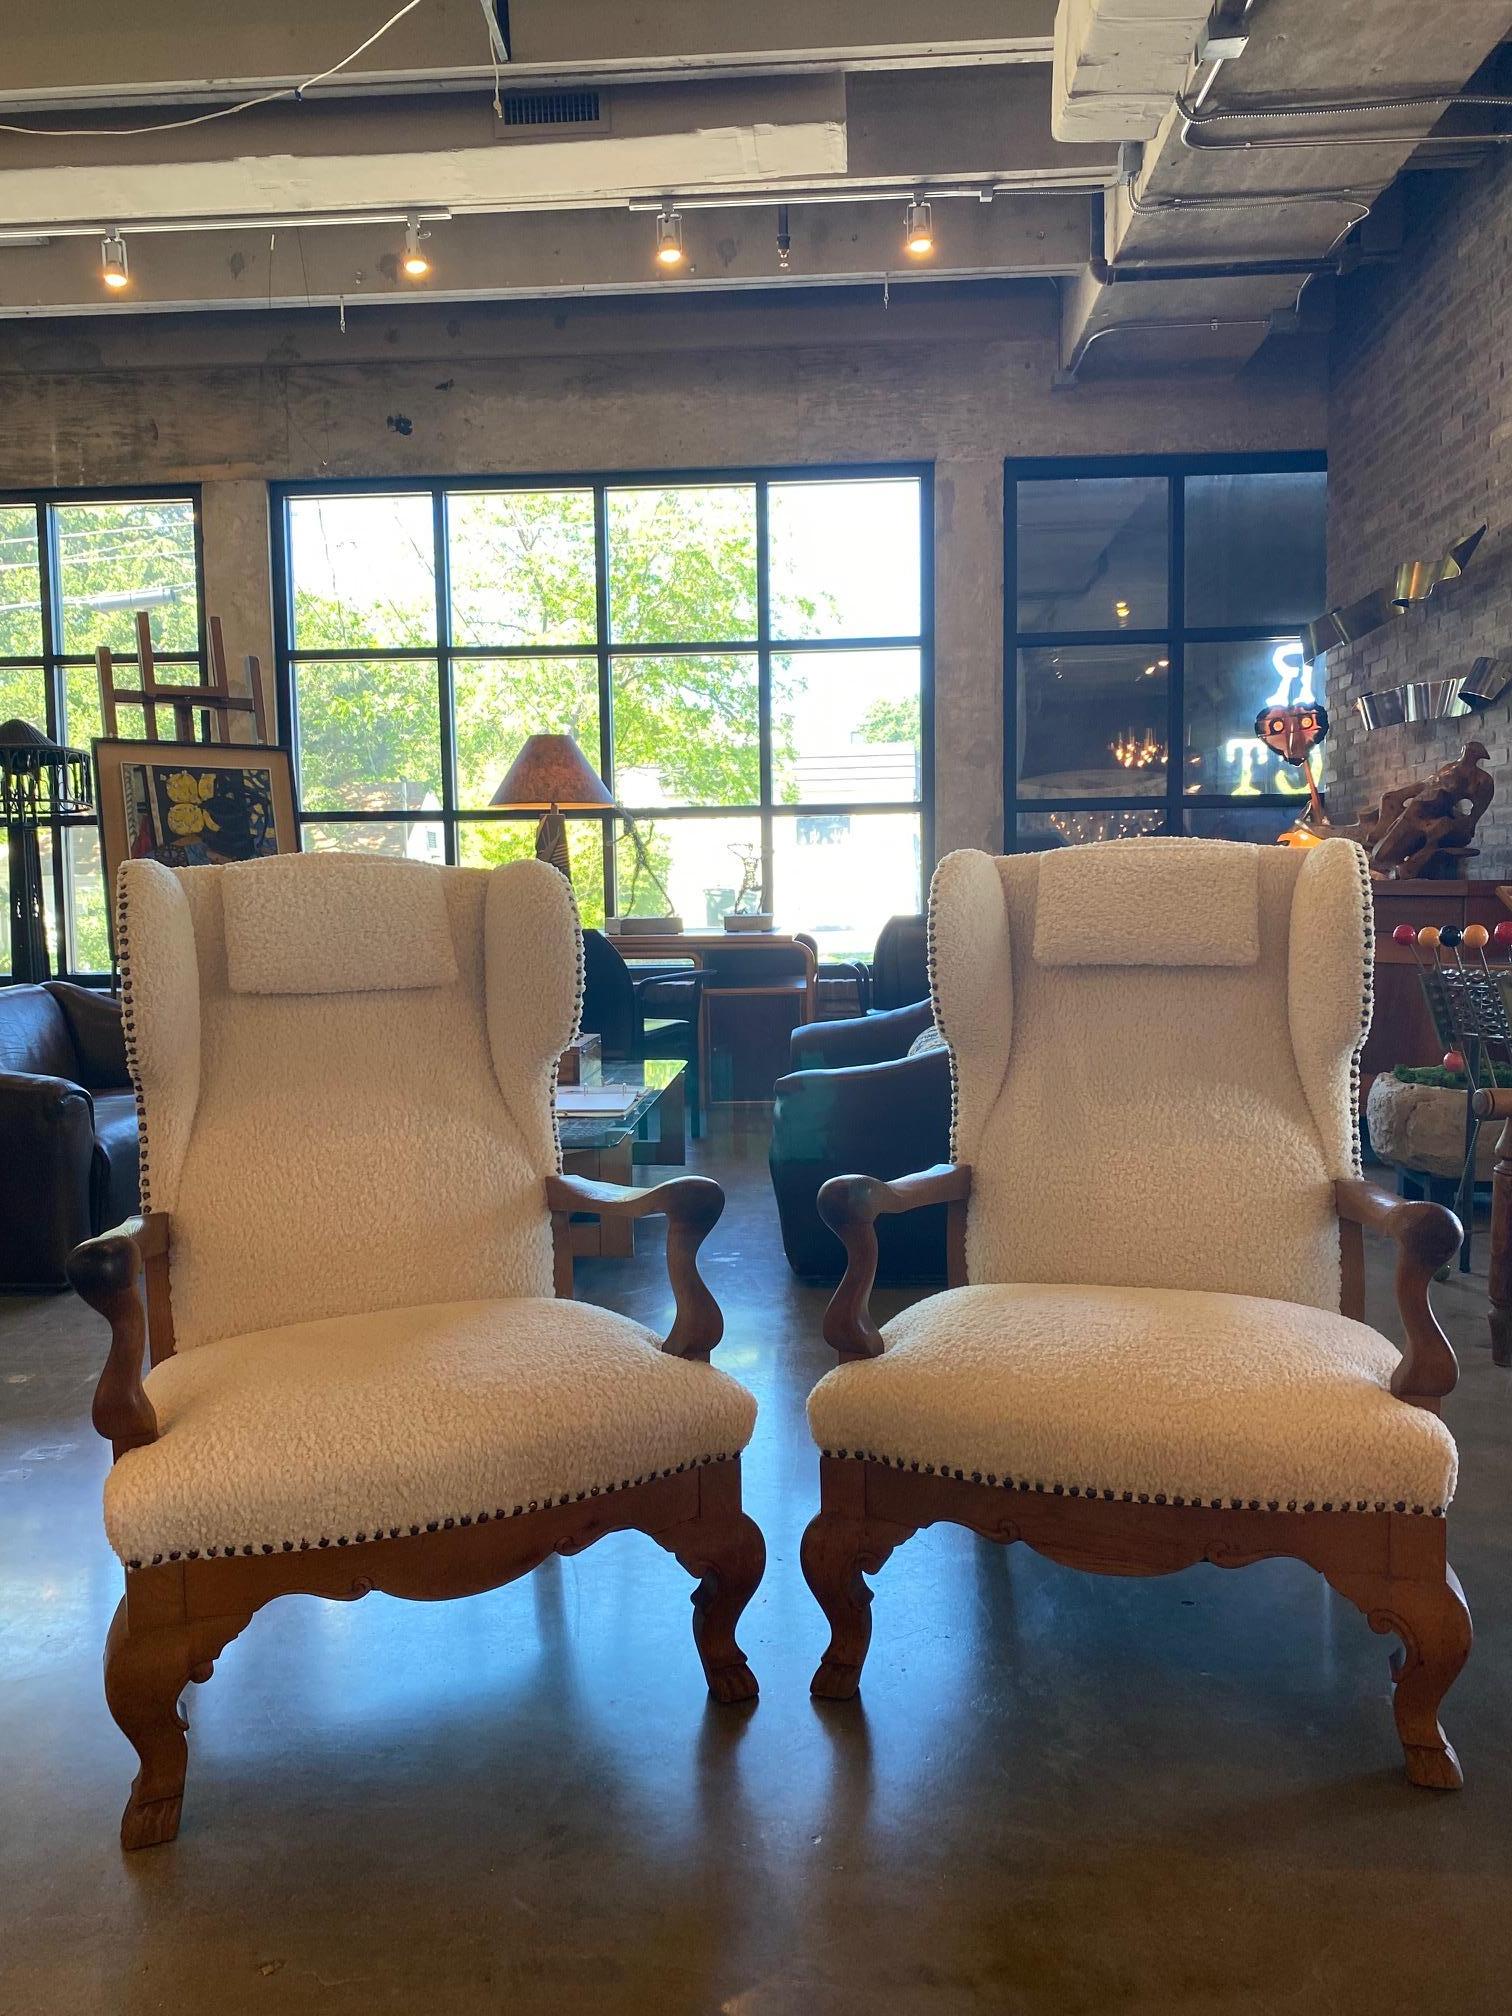 Pair of early-mid 20th century Dutch wingback chairs in solid oak with sculptural details reminiscent of French designers Guillerme et Chambron. New custom off-white boucle upholstery and bronze nail heads allow the chairs to present in almost